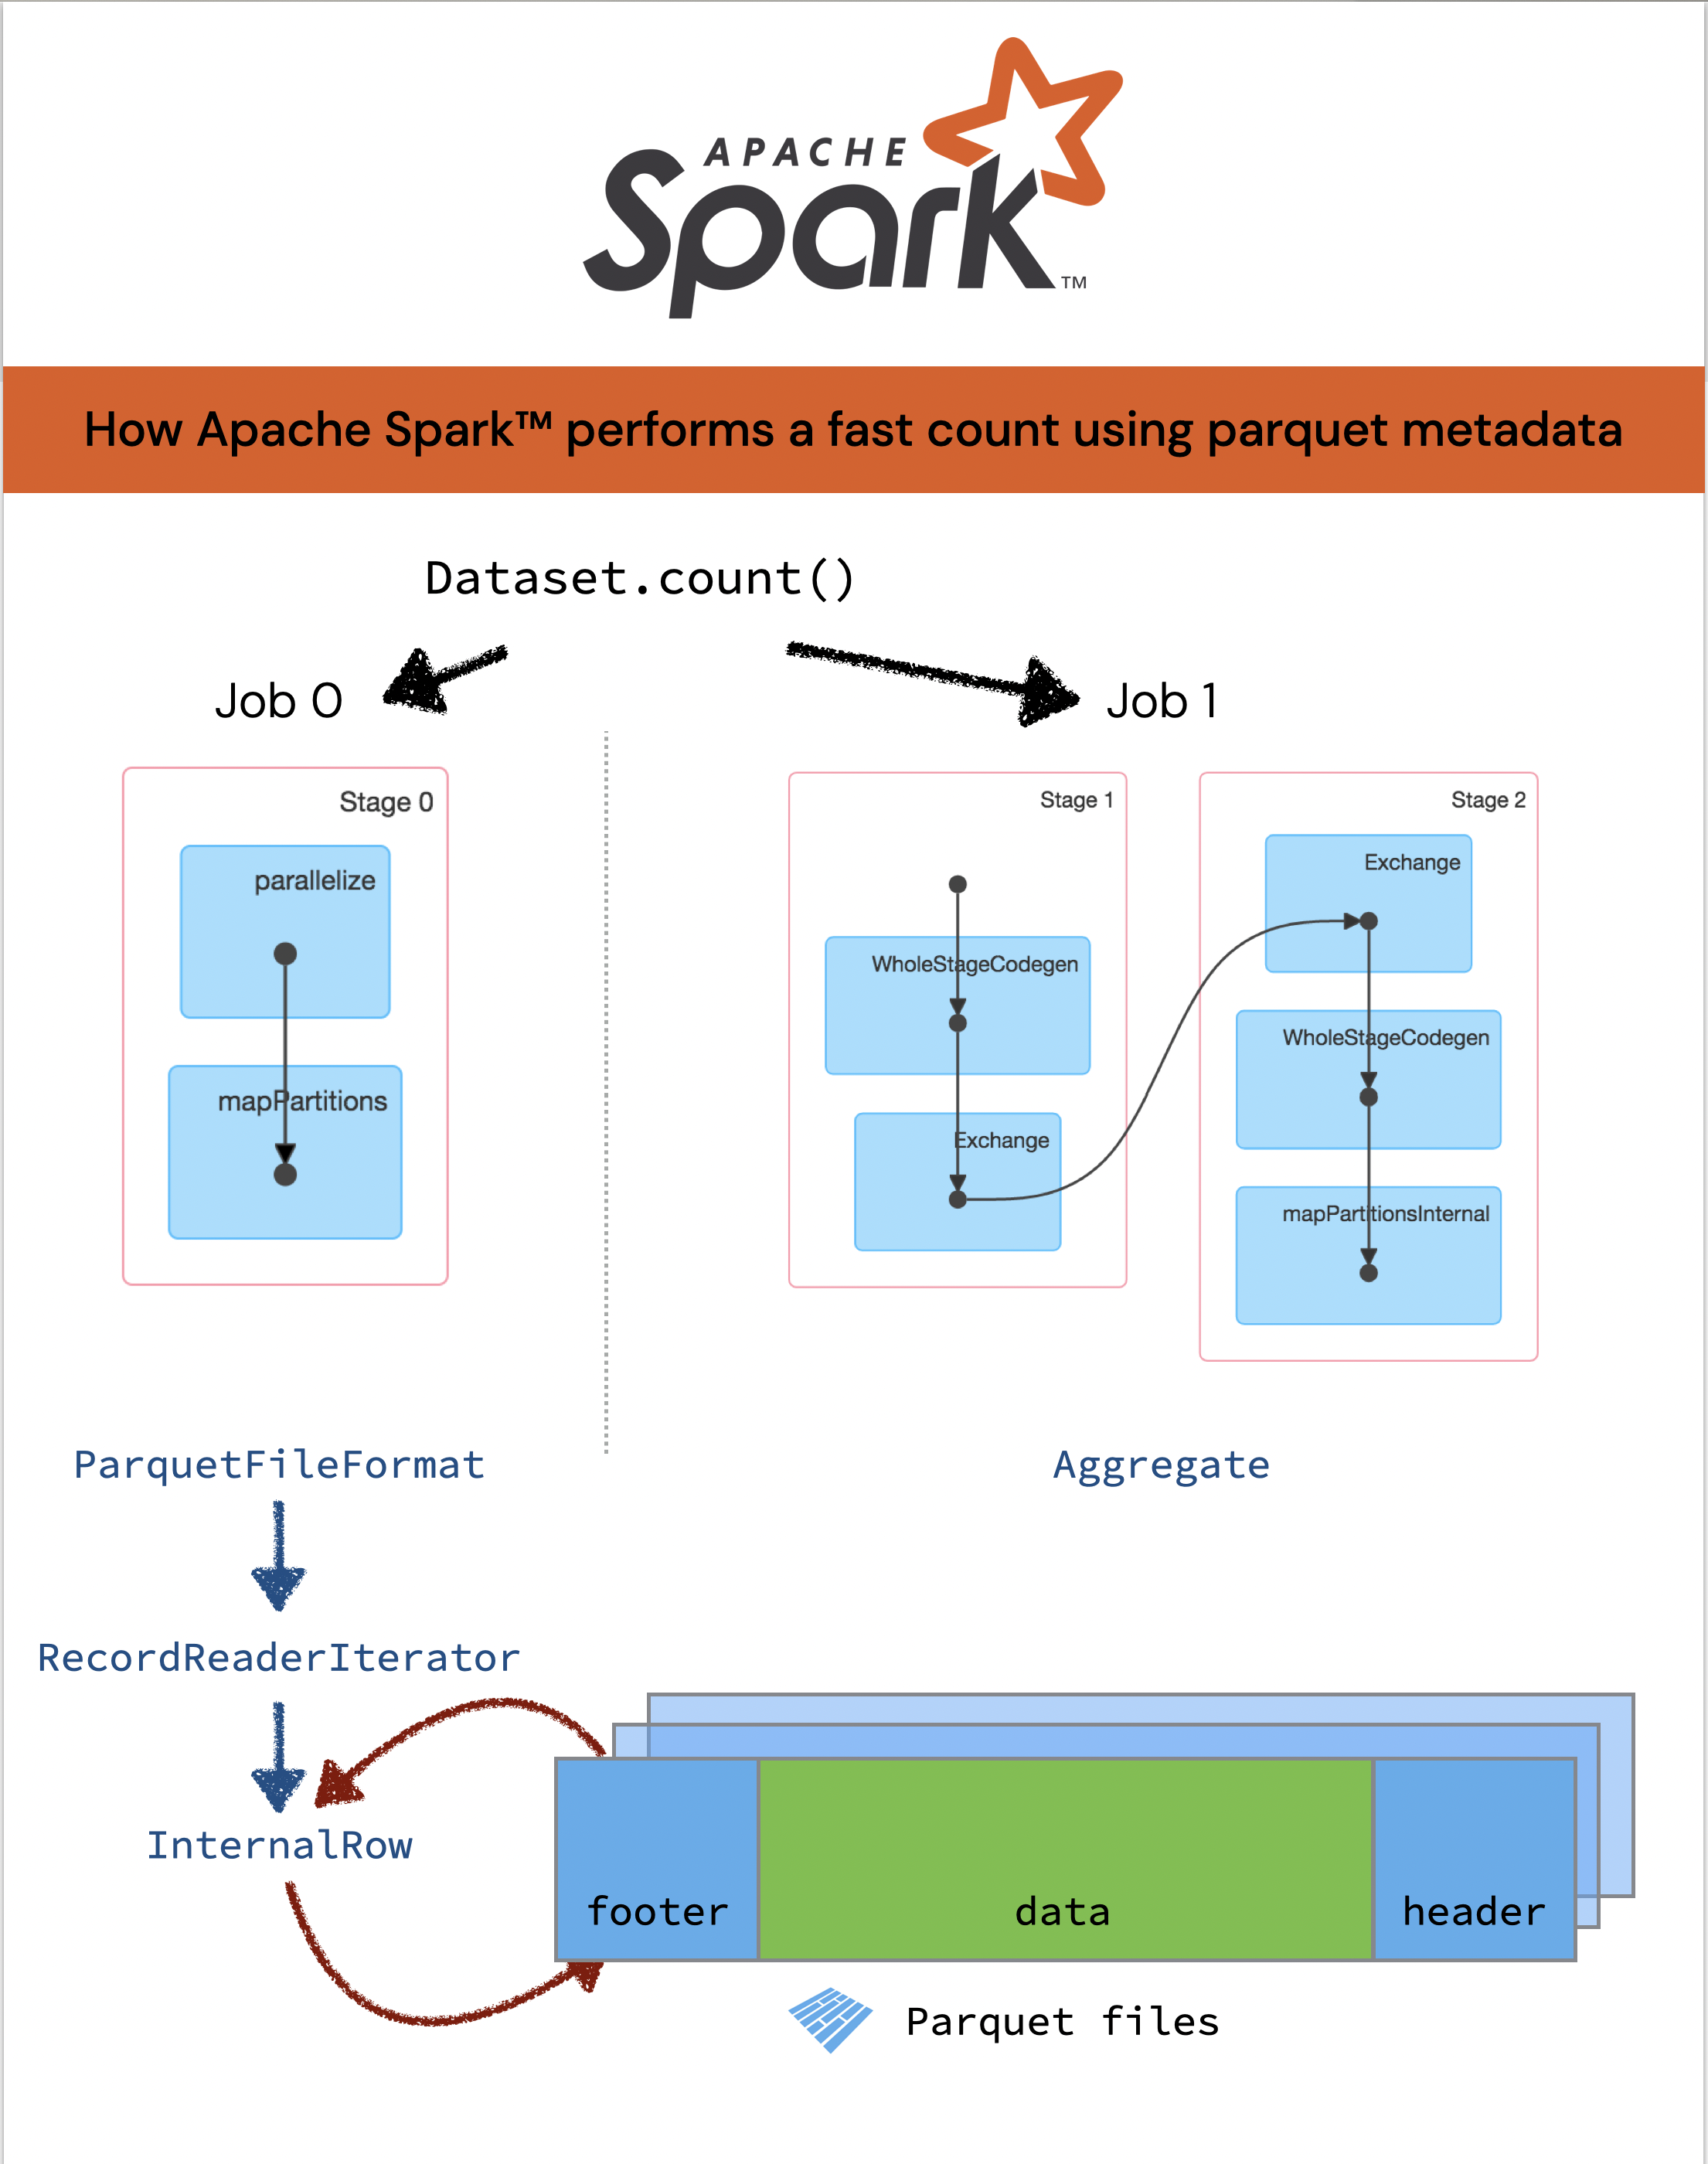 How Apache Spark™ performs a fast count using the parquet metadata